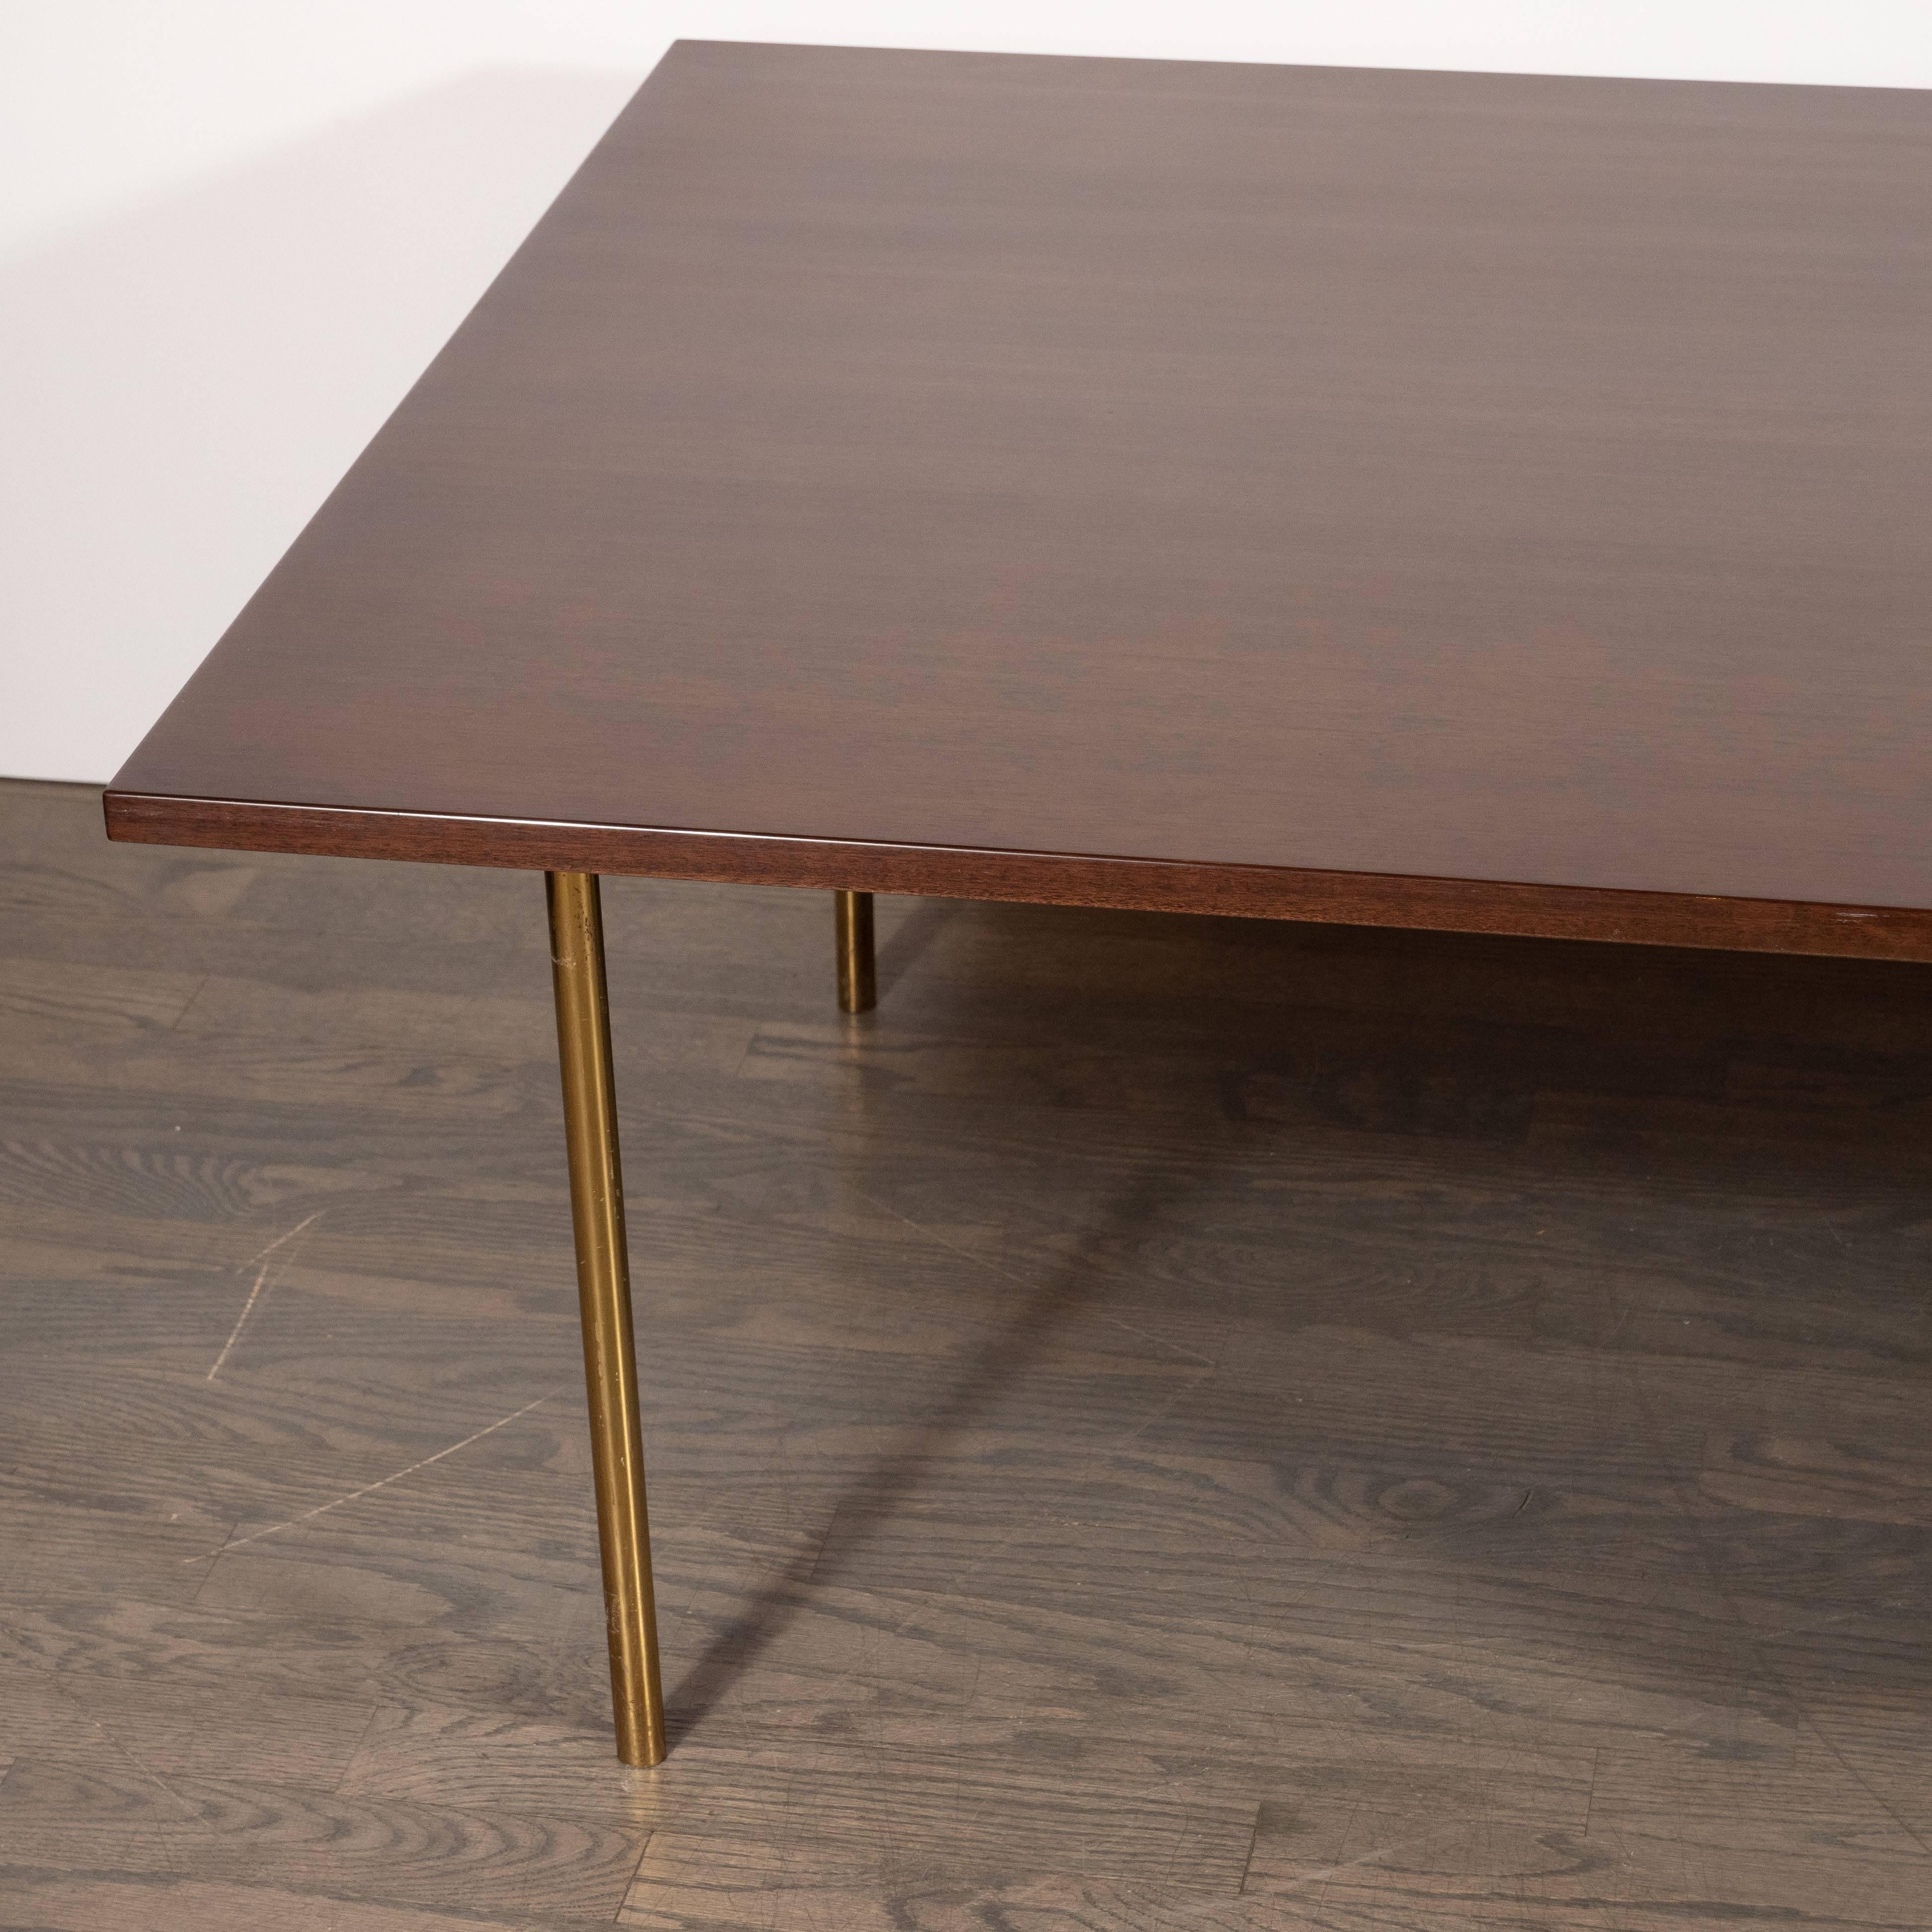 American Mid-Century Modern Two-Drawer Cocktail Table in Walnut and Brass, Harvey Probber For Sale